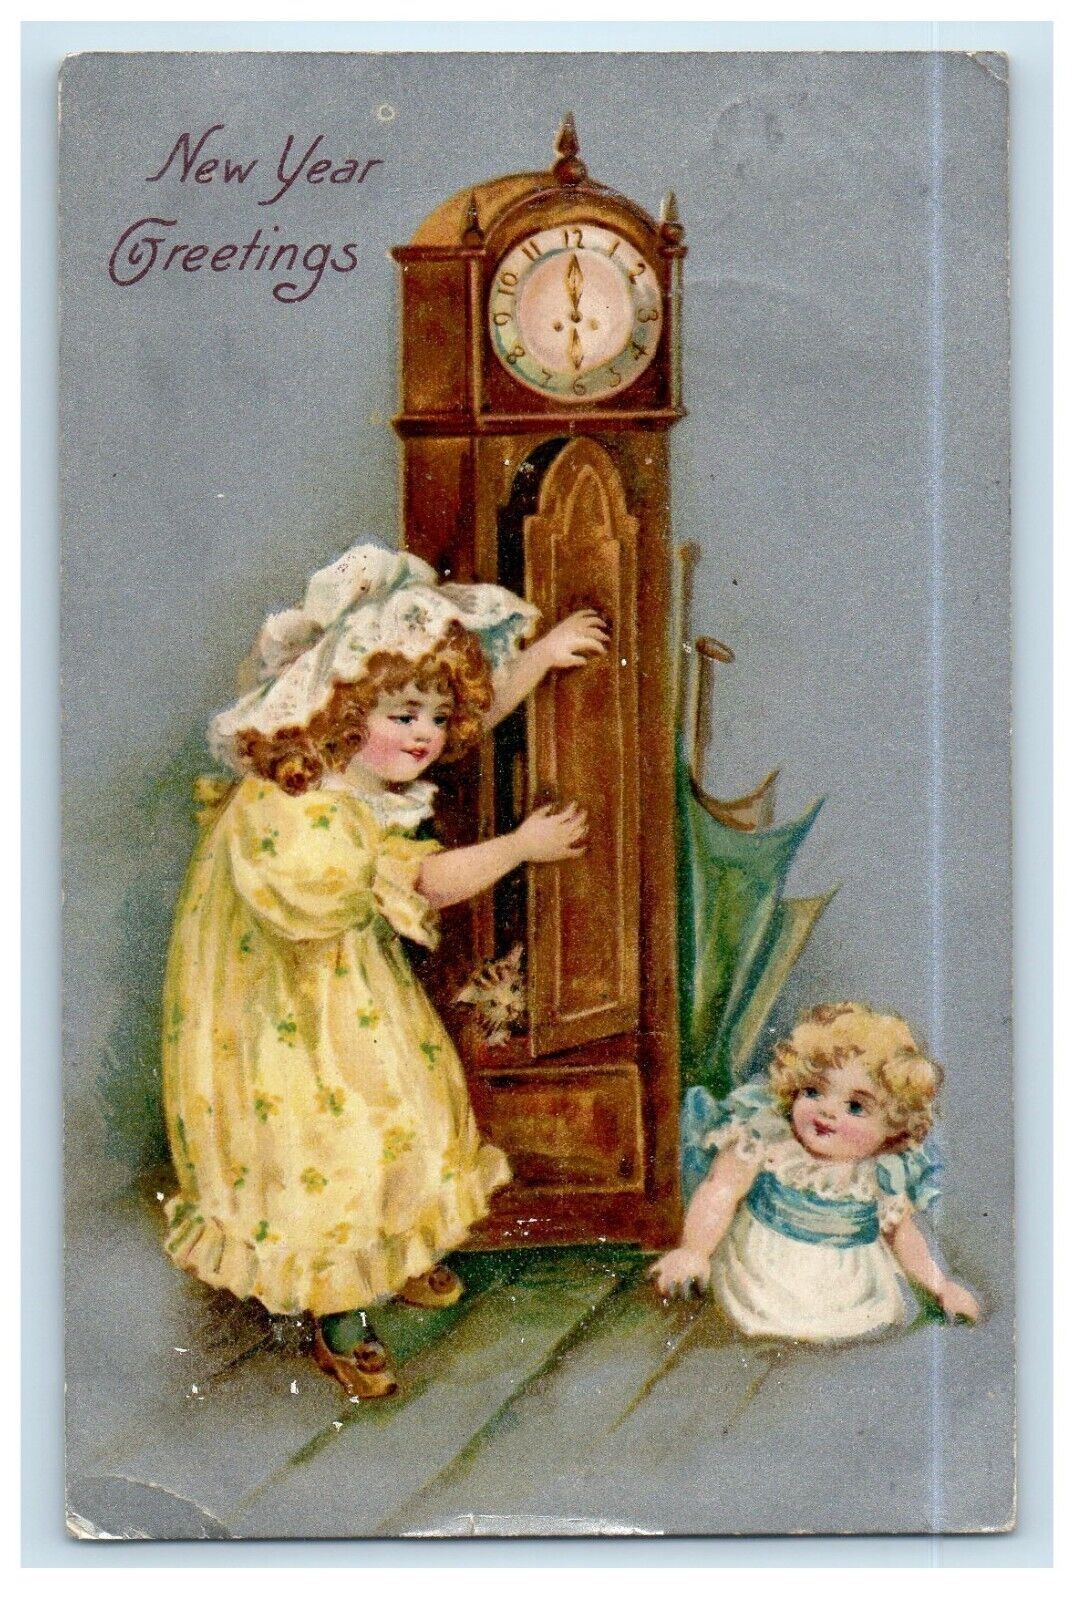 1908 New Year Greetings Two Girls Hiding Cat Clock Winsch Back Antique Postcard